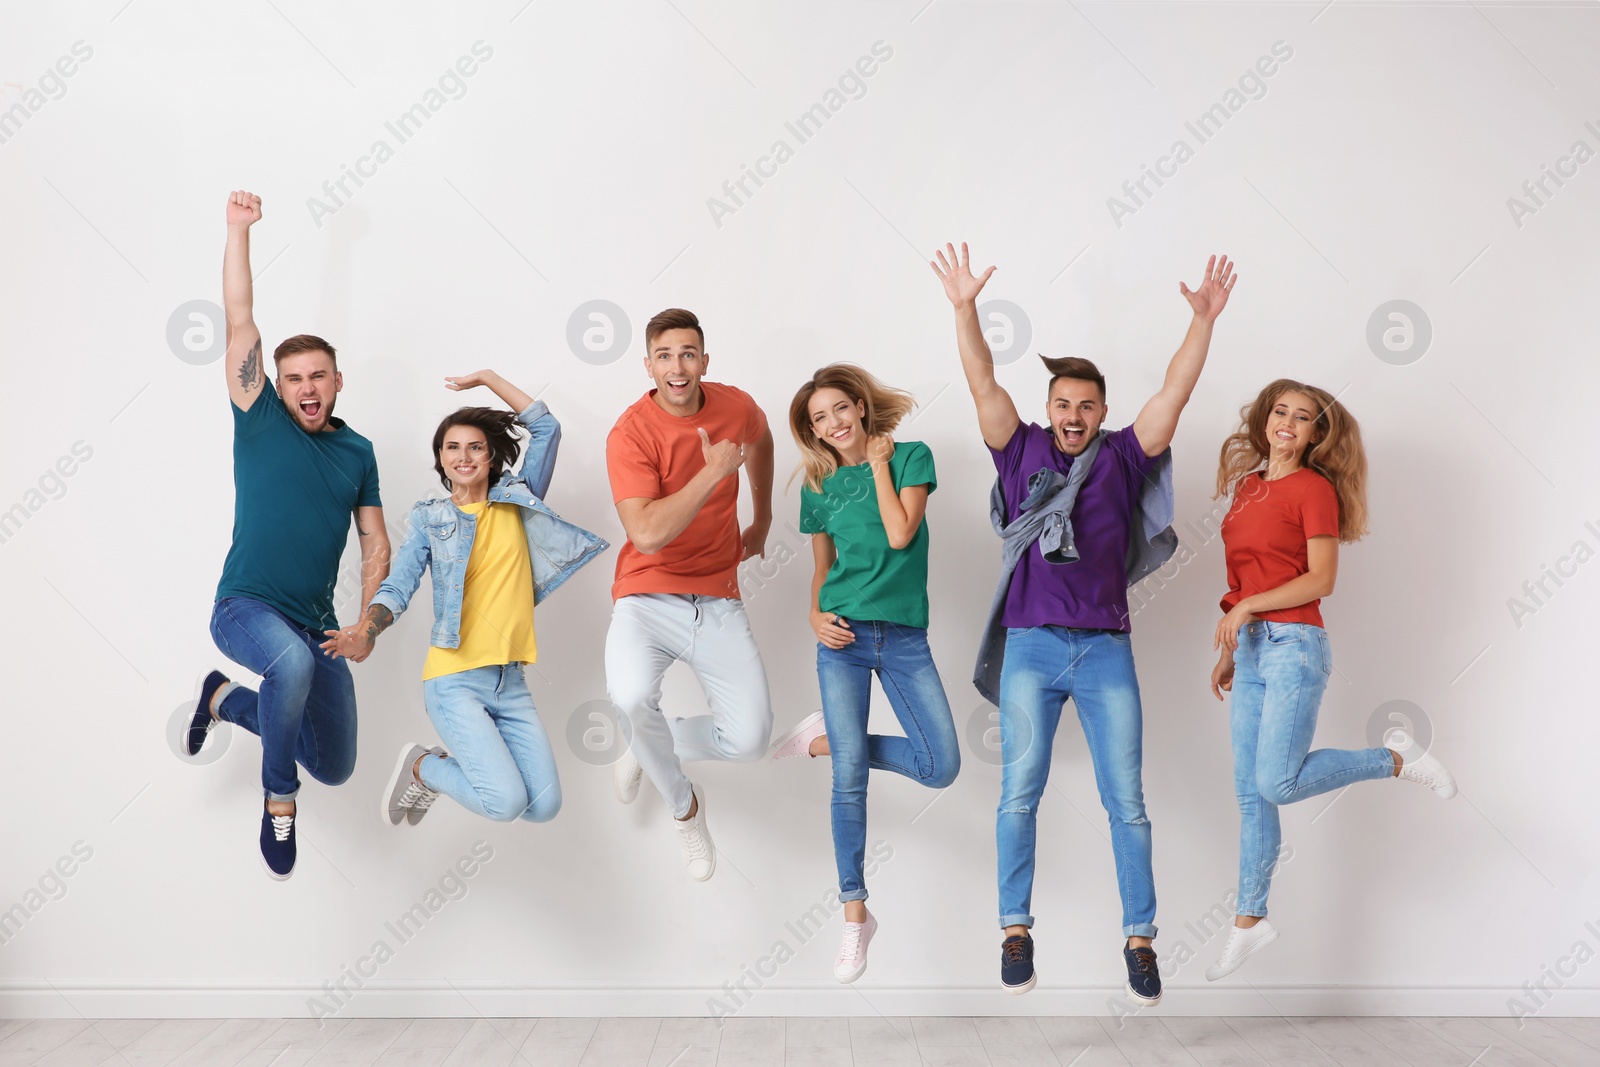 Photo of Group of young people in jeans and colorful t-shirts jumping near light wall